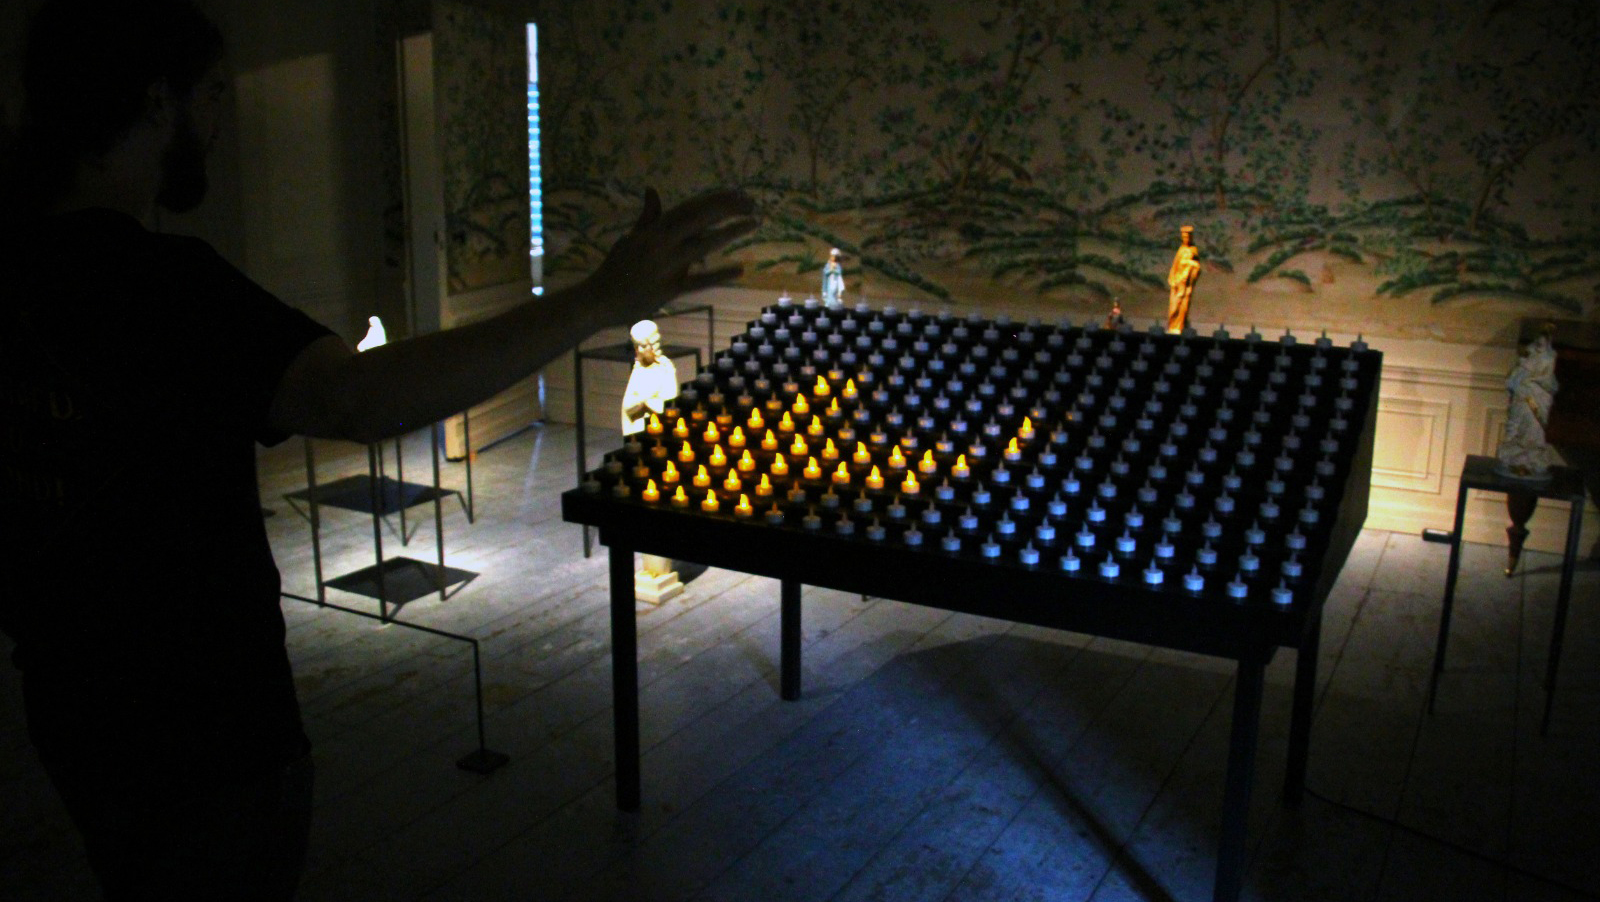 A man stands with outstretched hand in front of an altar table filled with prayer candles, the candles are ordinary battery candles and only a few of them in a corner shine in the pattern of a cross. In the background are black pedestals with various church statues on them.